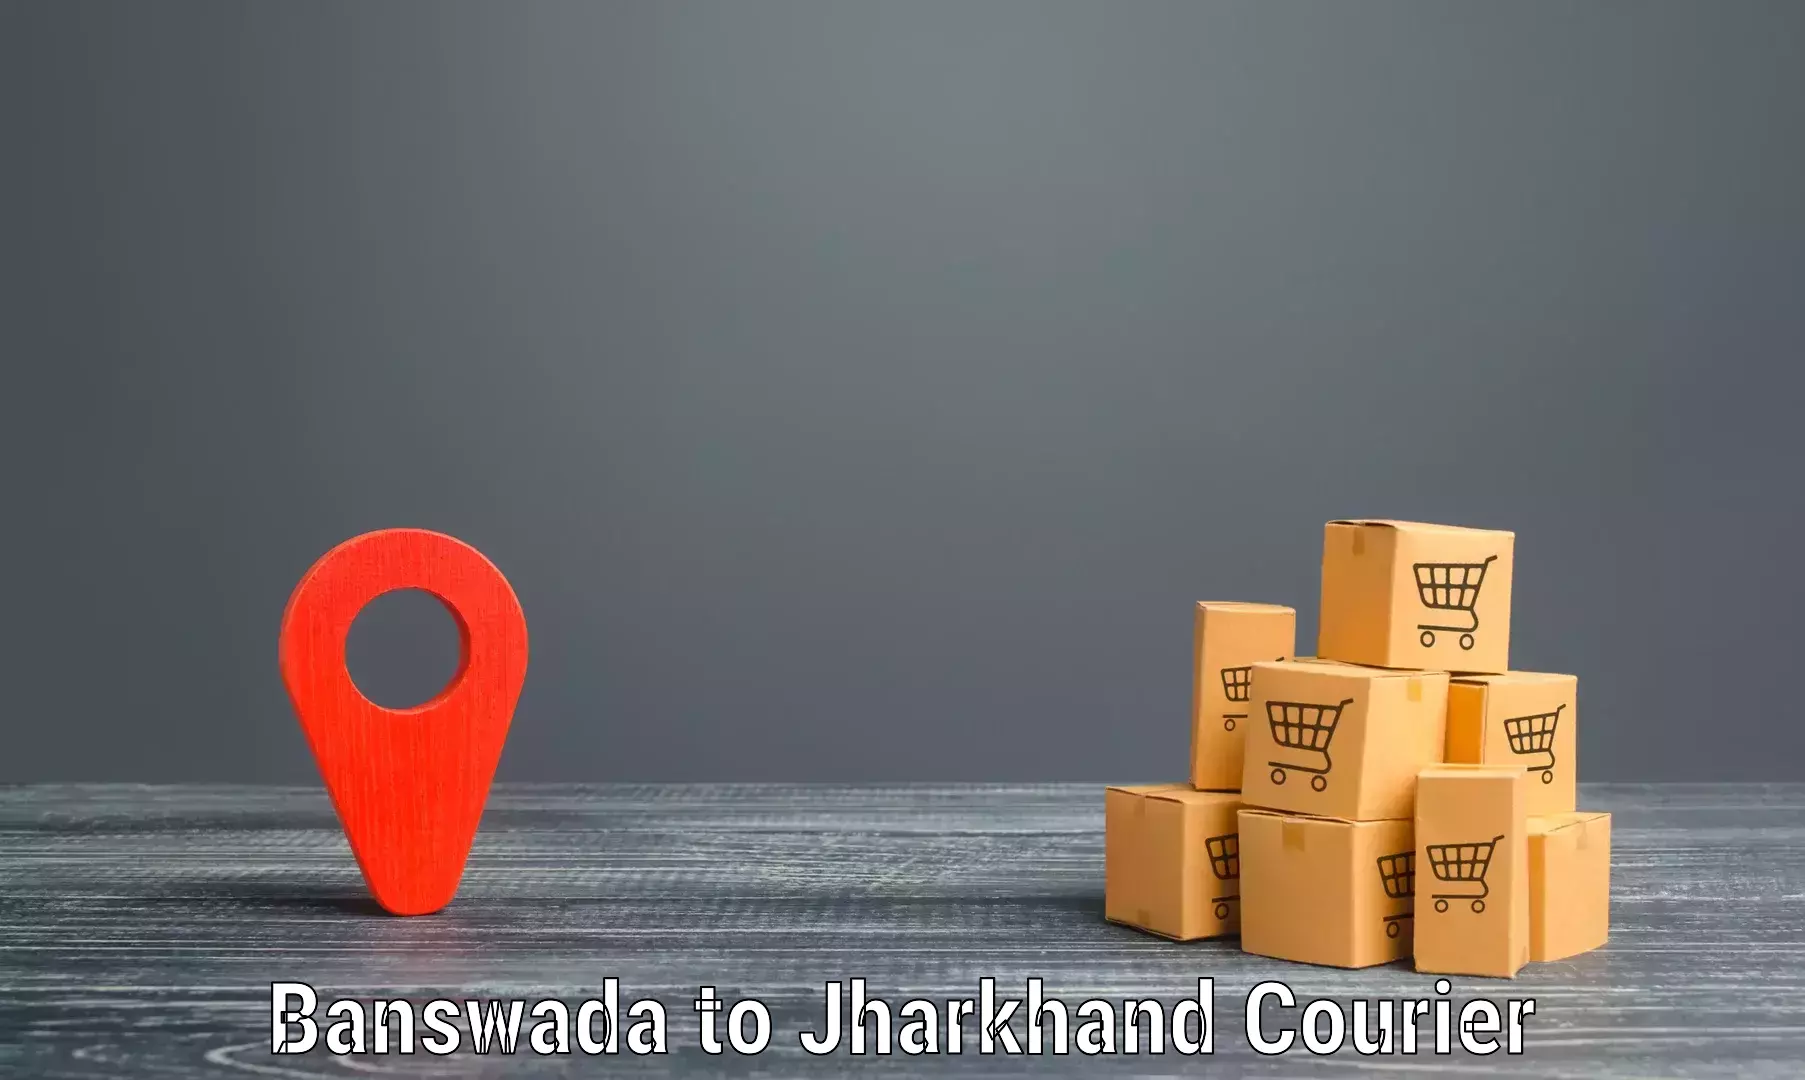 Secure freight services Banswada to Dhanbad